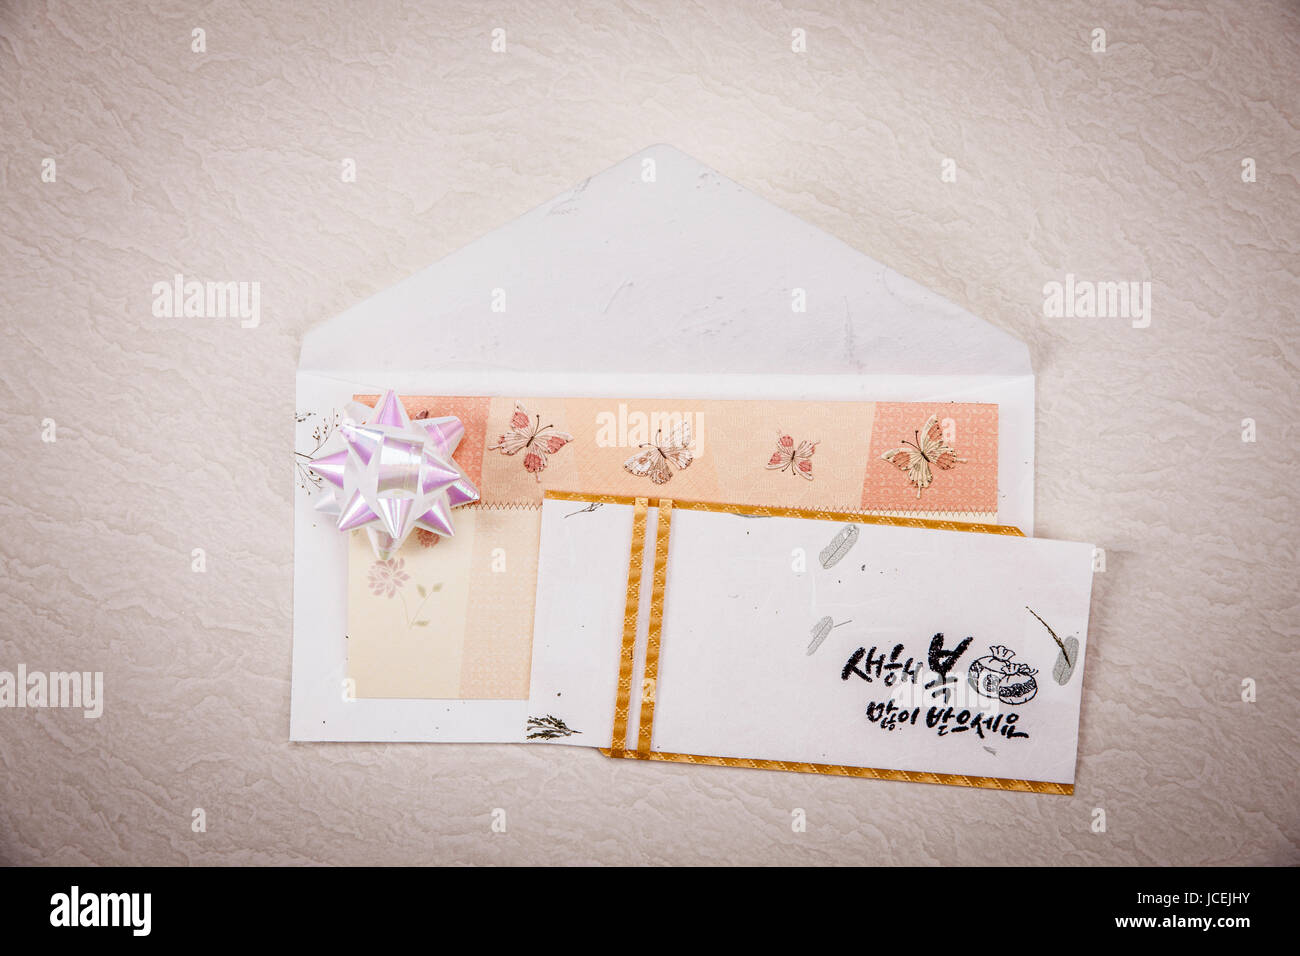 New Year's greeting card with Korean calligraphy Stock Photo